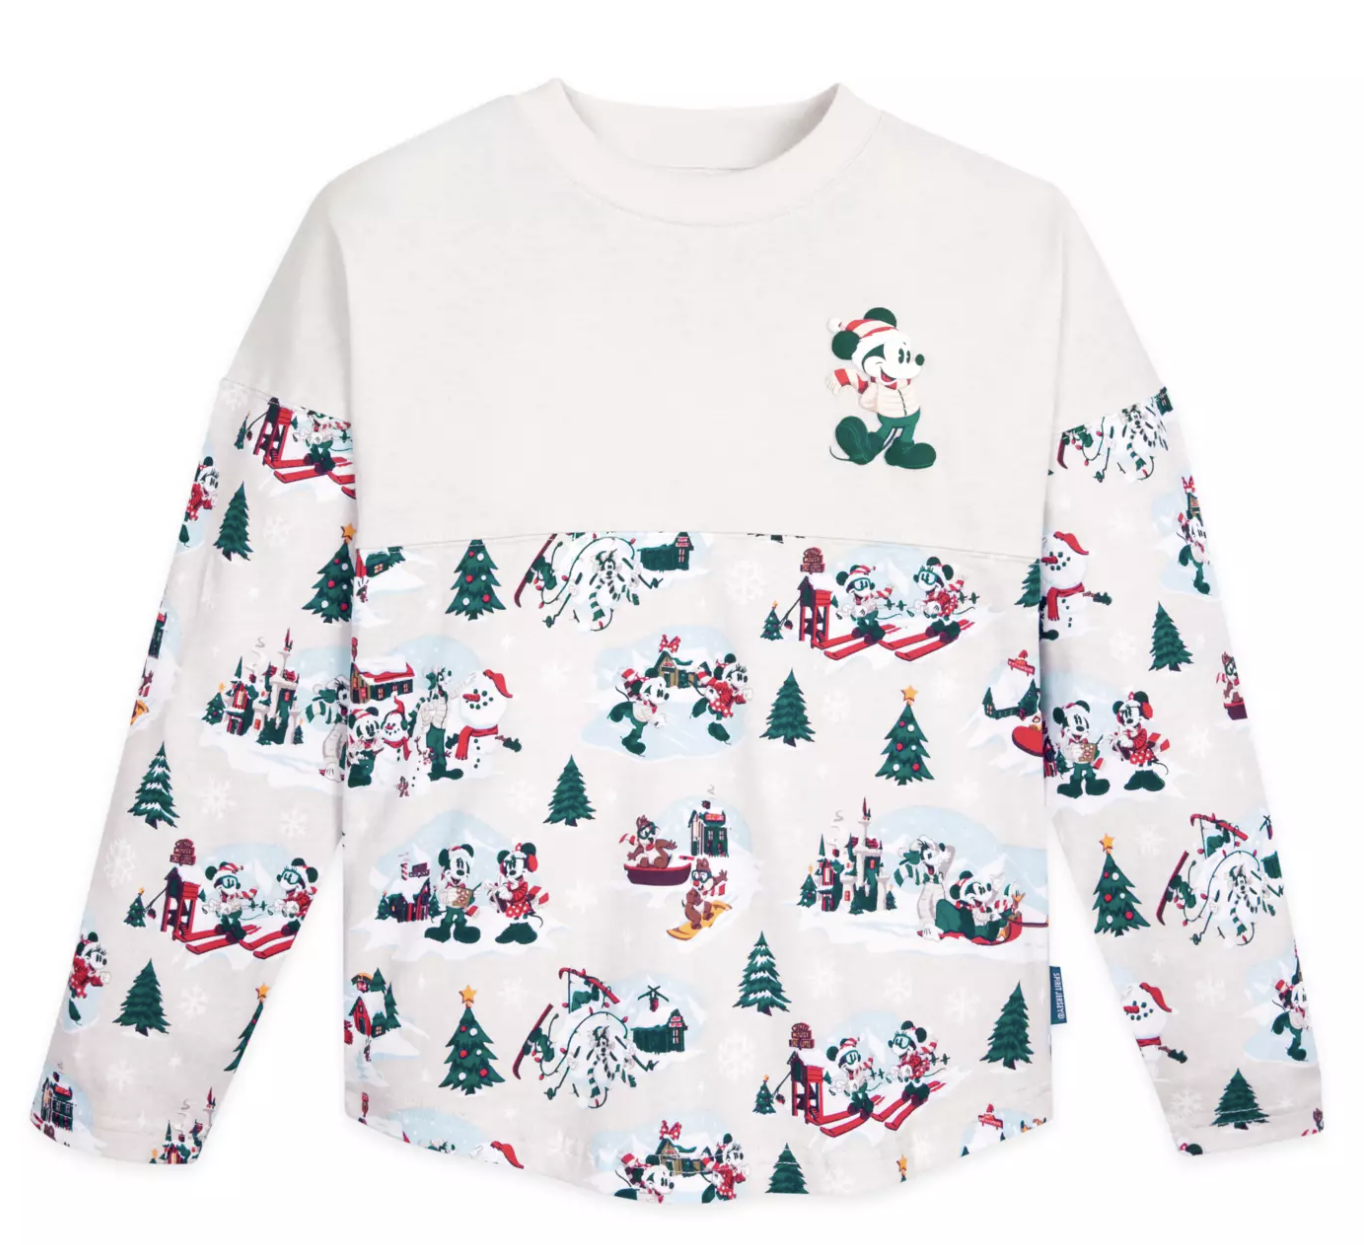 Disney Just Seriously Upped Their Holiday Spirit Jersey Game! - AllEars.Net